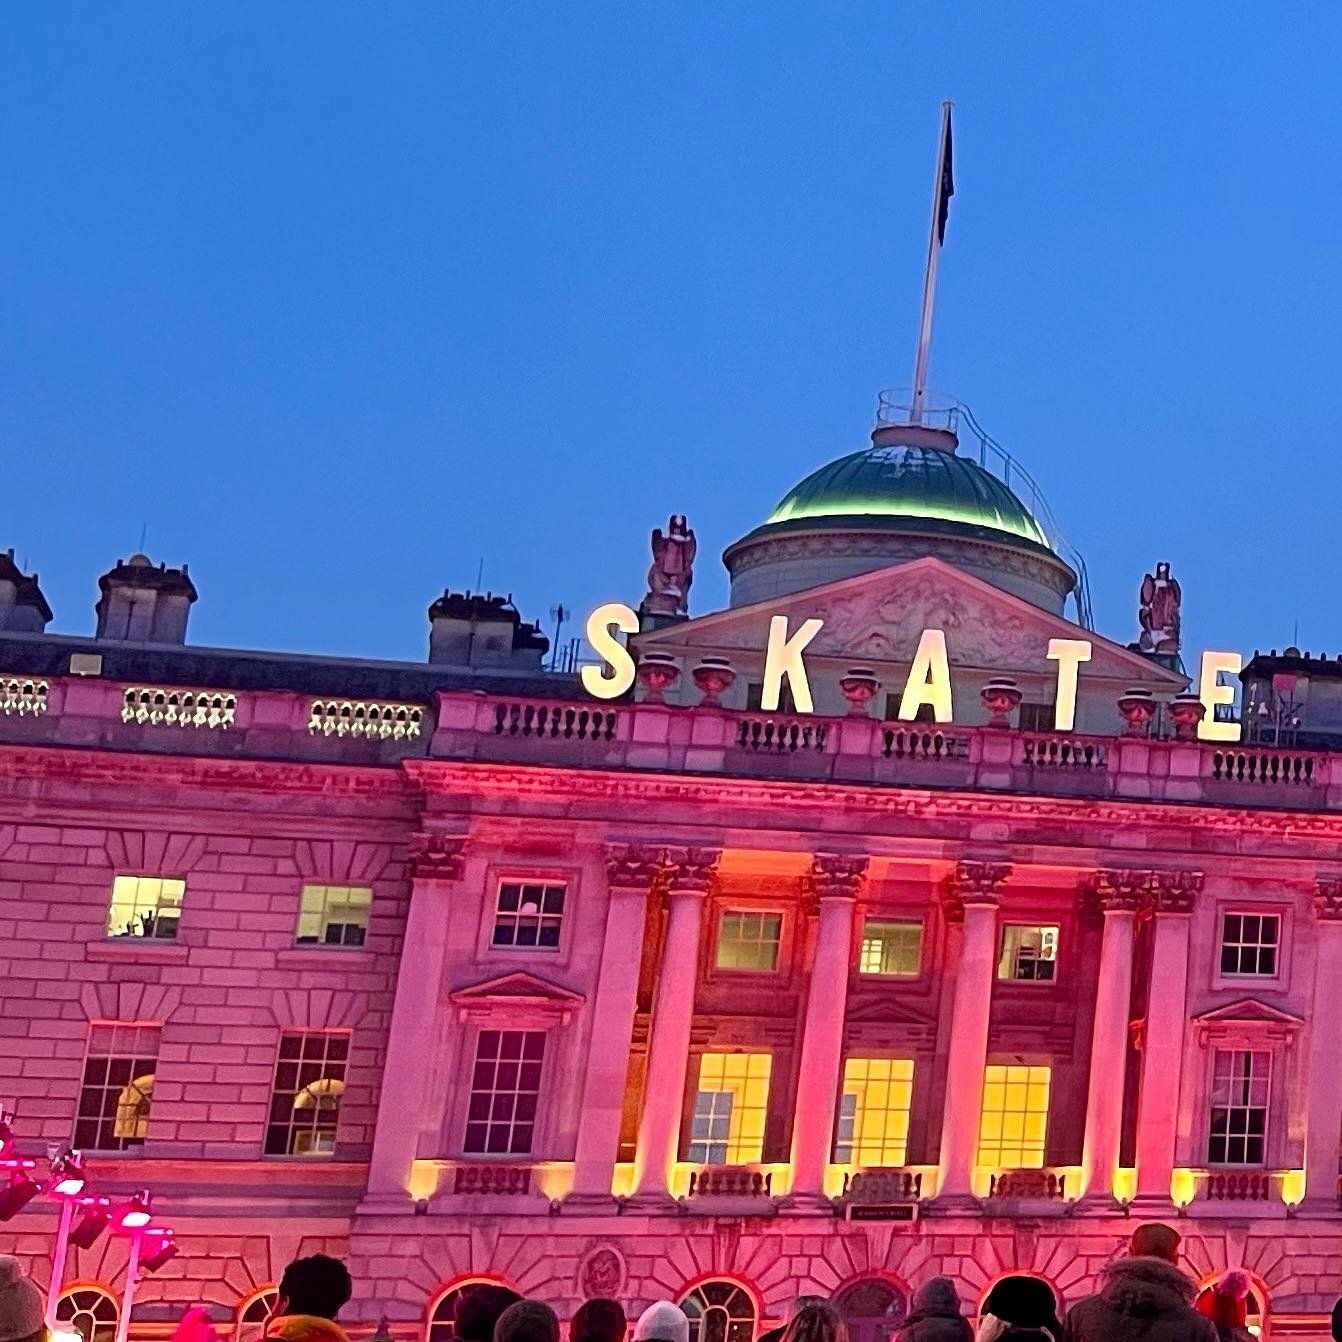 Thank you Somerset House for a magical Christmas party. Ice skating, mulled wine, hot chocolate, a beautiful location and great company - we even had snow - what more could you ask for?

#christmastree #christmas #christmasparty #iceskating #snow #lo